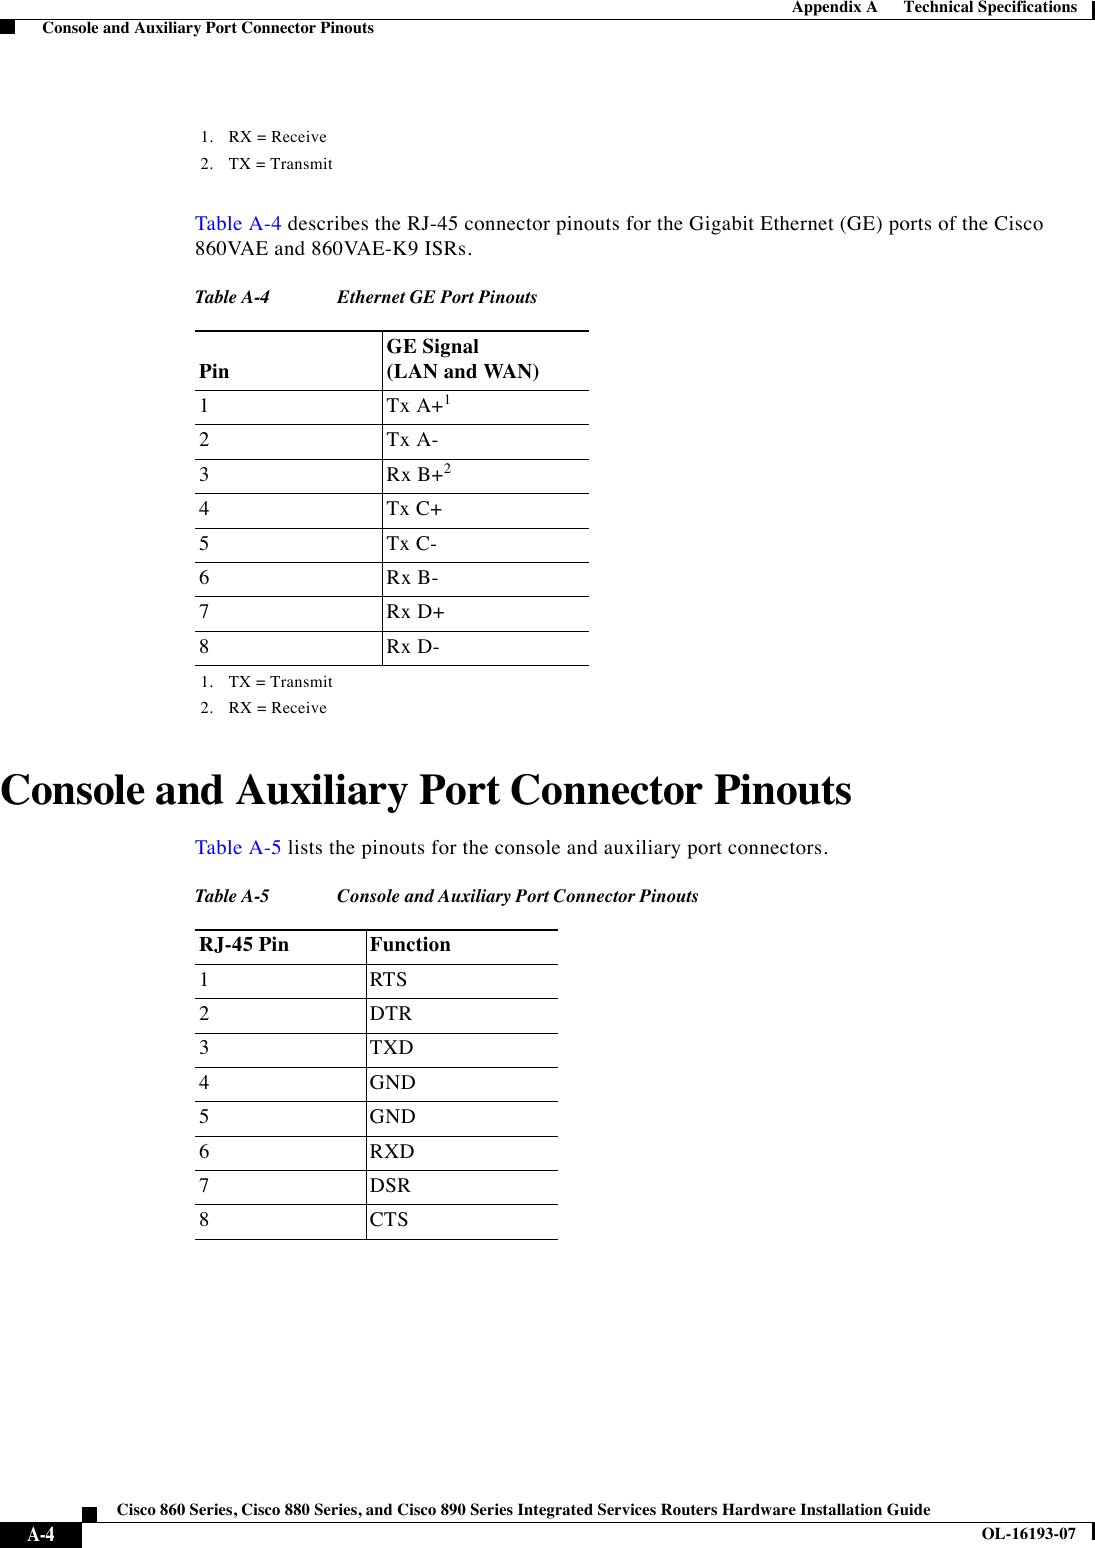  A-4Cisco 860 Series, Cisco 880 Series, and Cisco 890 Series Integrated Services Routers Hardware Installation GuideOL-16193-07Appendix A      Technical Specifications  Console and Auxiliary Port Connector PinoutsTable A-4 describes the RJ-45 connector pinouts for the Gigabit Ethernet (GE) ports of the Cisco 860VAE and 860VAE-K9 ISRs.Console and Auxiliary Port Connector PinoutsTable A-5 lists the pinouts for the console and auxiliary port connectors.1. RX = Receive2. TX = TransmitTabl e A-4 Ethernet GE Port Pinouts PinGE Signal(LAN and WAN)1Tx A+11. TX = Transmit2Tx A-3Rx B+22. RX = Receive4Tx C+5Tx C-6Rx B-7Rx D+8Rx D-Tabl e A-5 Console and Auxiliary Port Connector Pinouts RJ-45 Pin Function1RTS2DTR3TXD4GND5GND6RXD7DSR8CTS